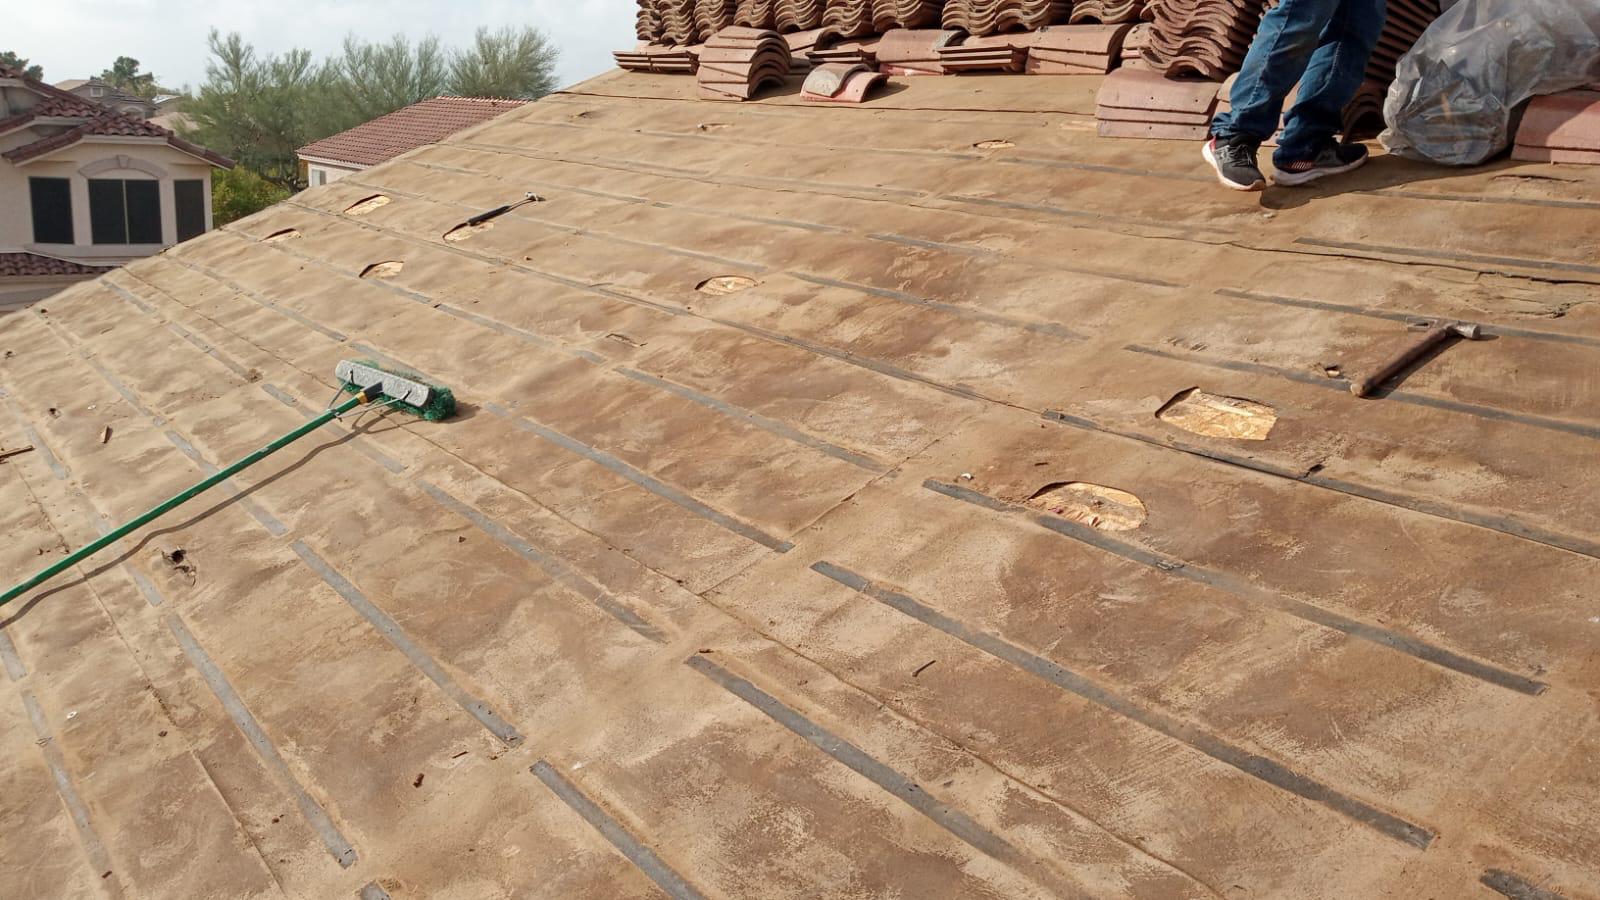 Roofing specialists at work on tile re-felt in Fountain Hills.